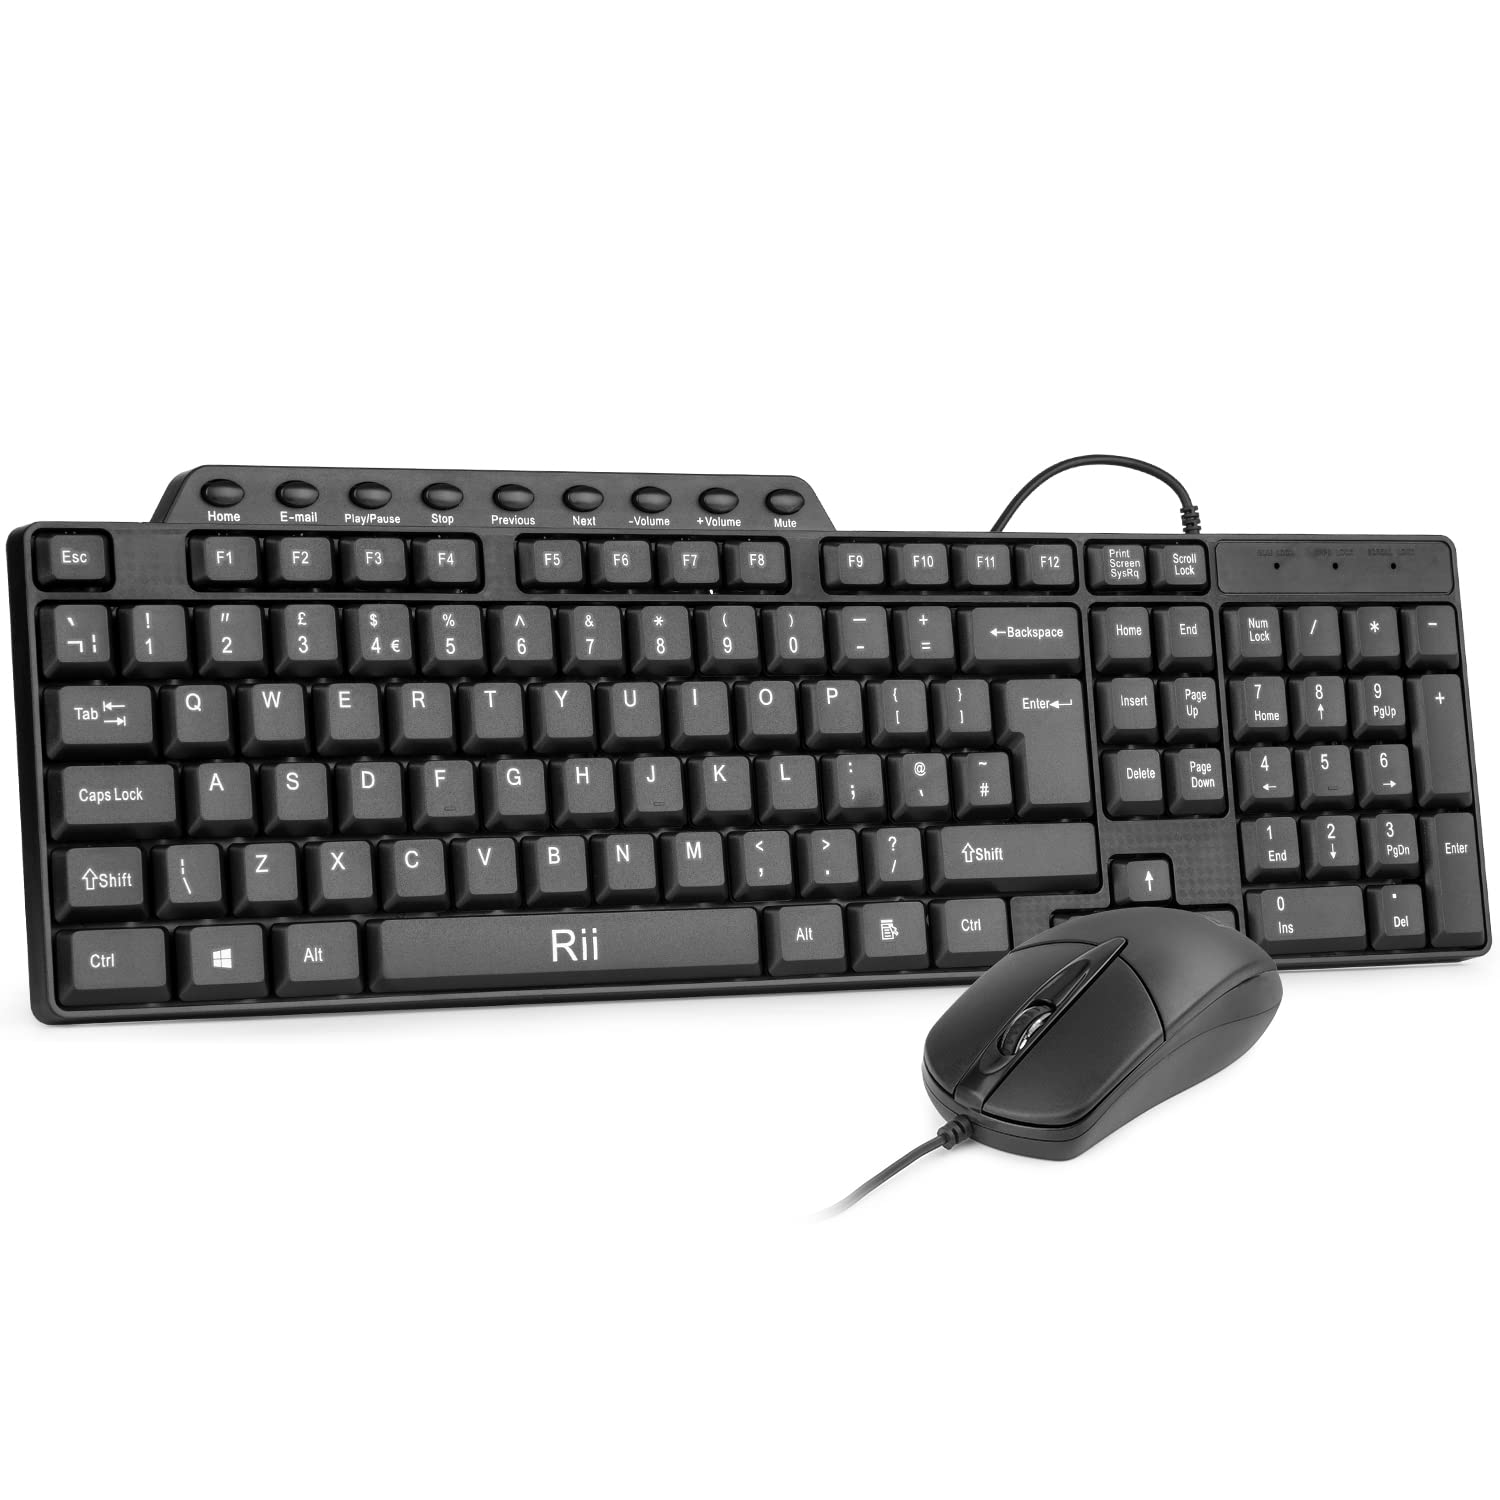 Wired Keyboard and Mouse,Rii RK203 Full Size Slim Keyboard, Business Keyboard and Mouse Wired for Computer,Laptop,PC,Notebook,Windows Home Office